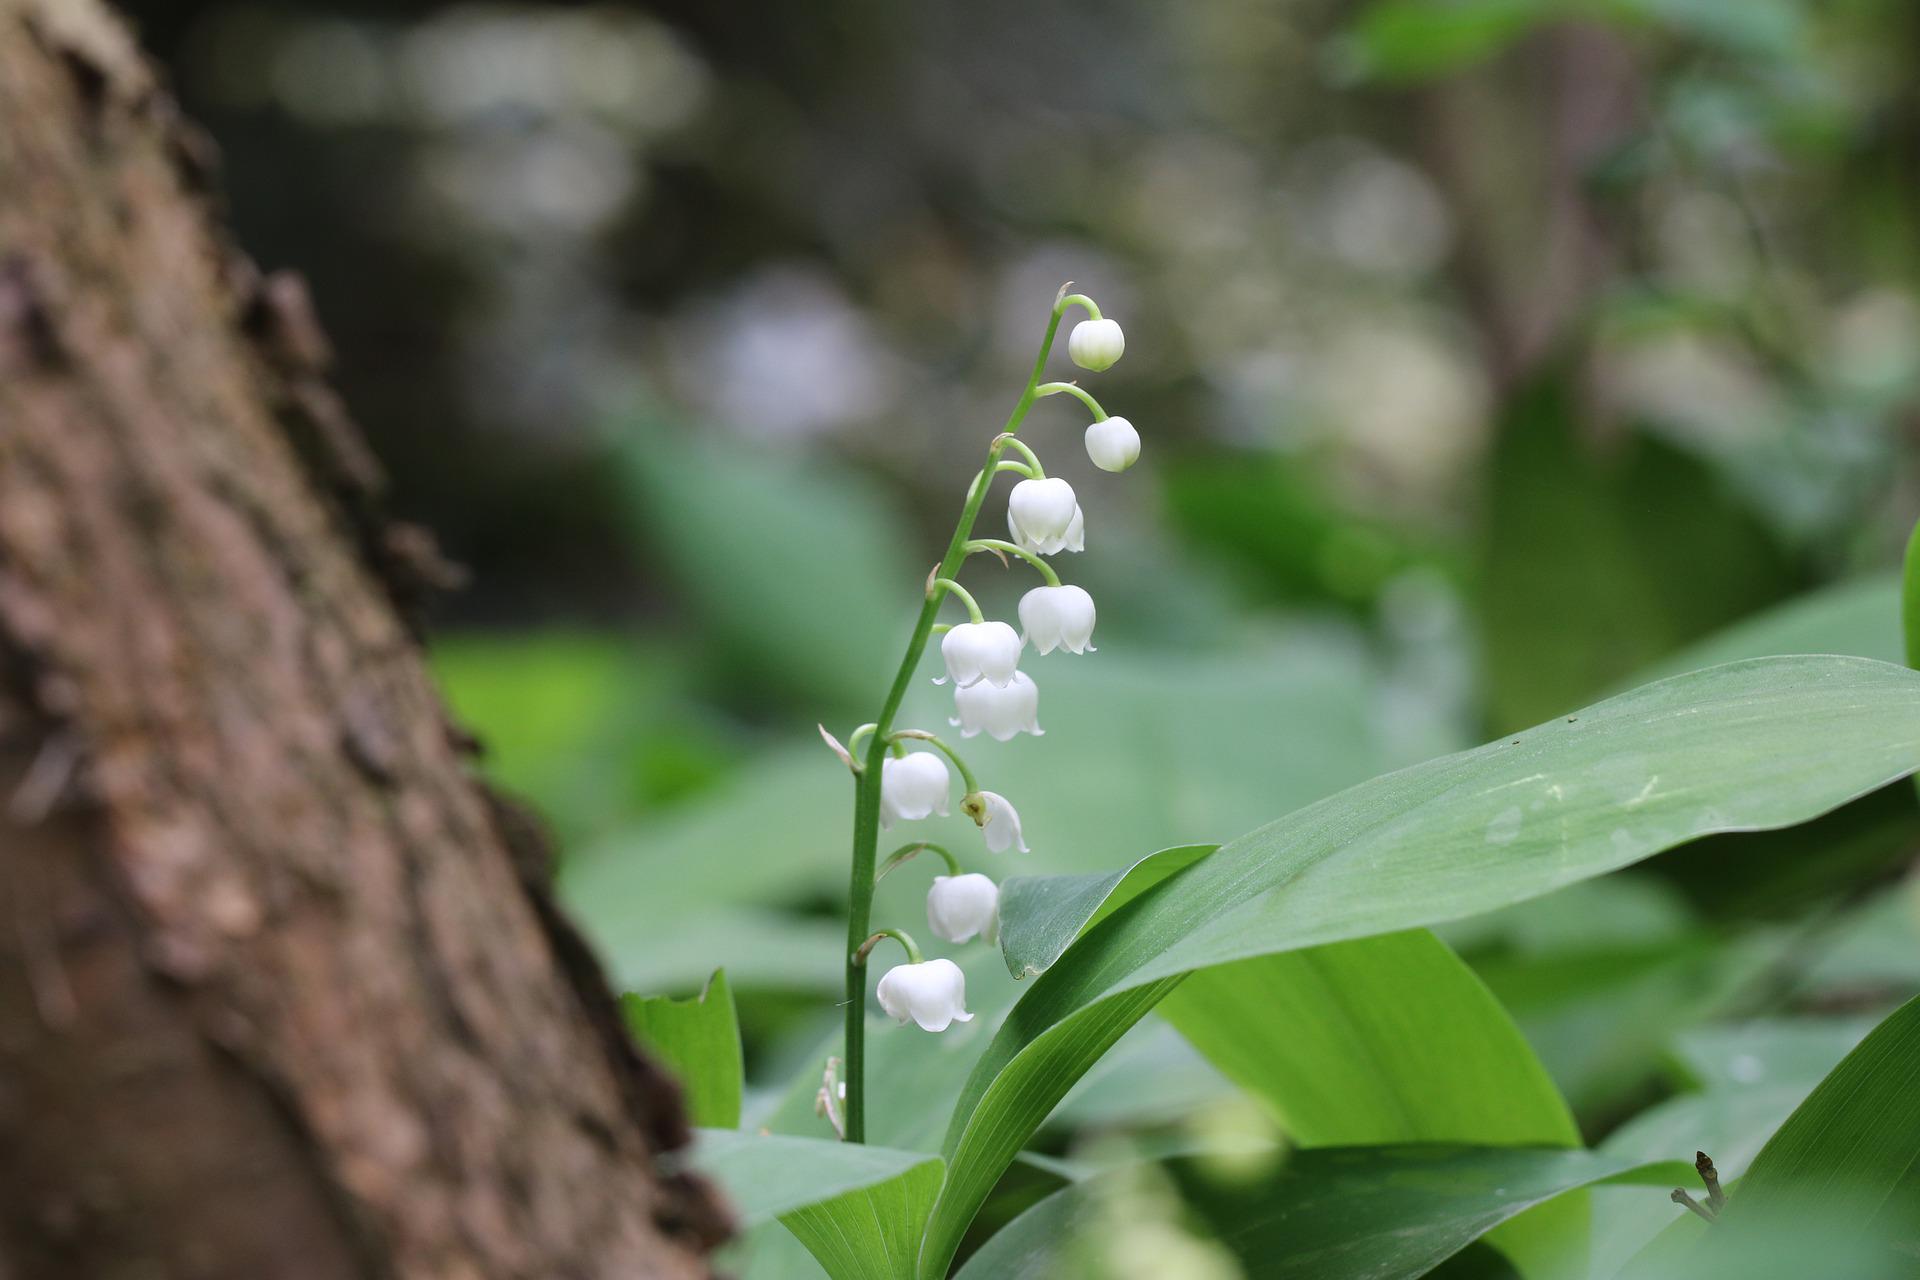 lily-of-the-valley-g645c344c5_1920